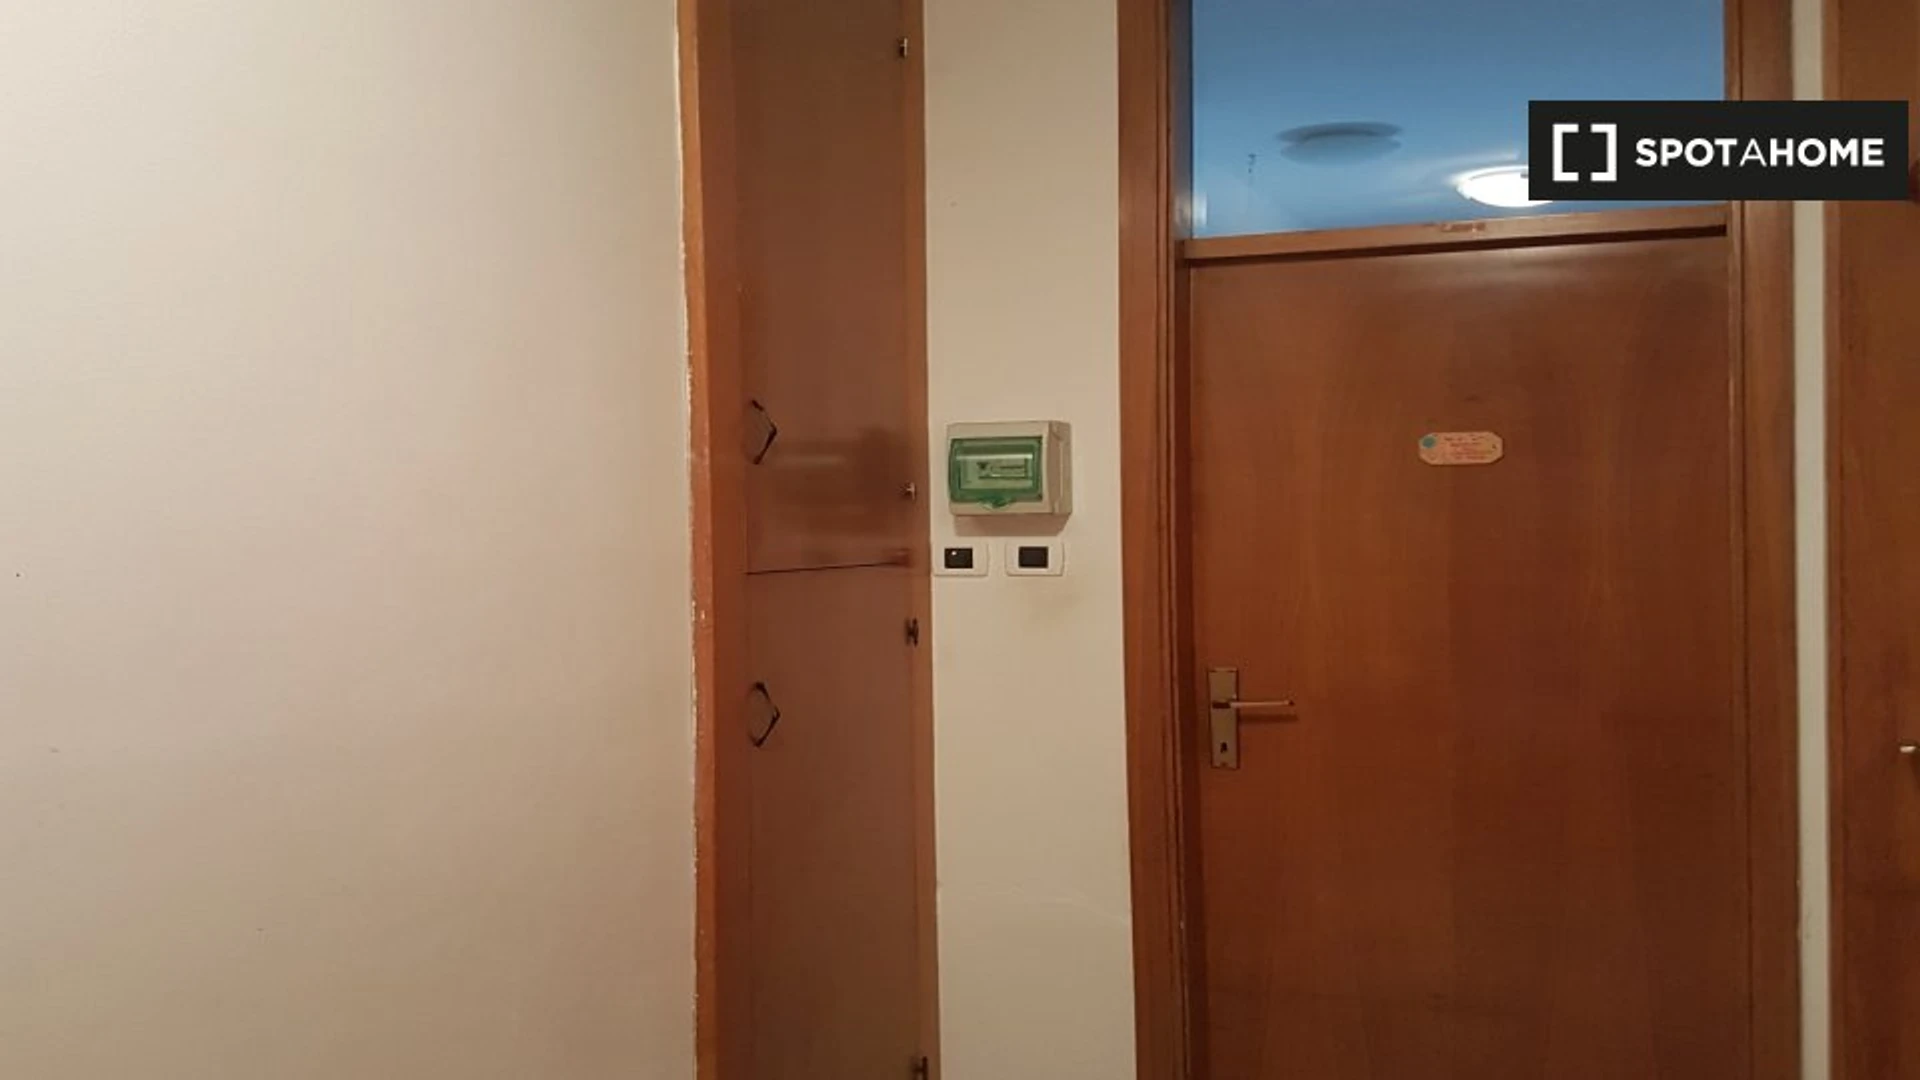 Room for rent in a shared flat in Trento